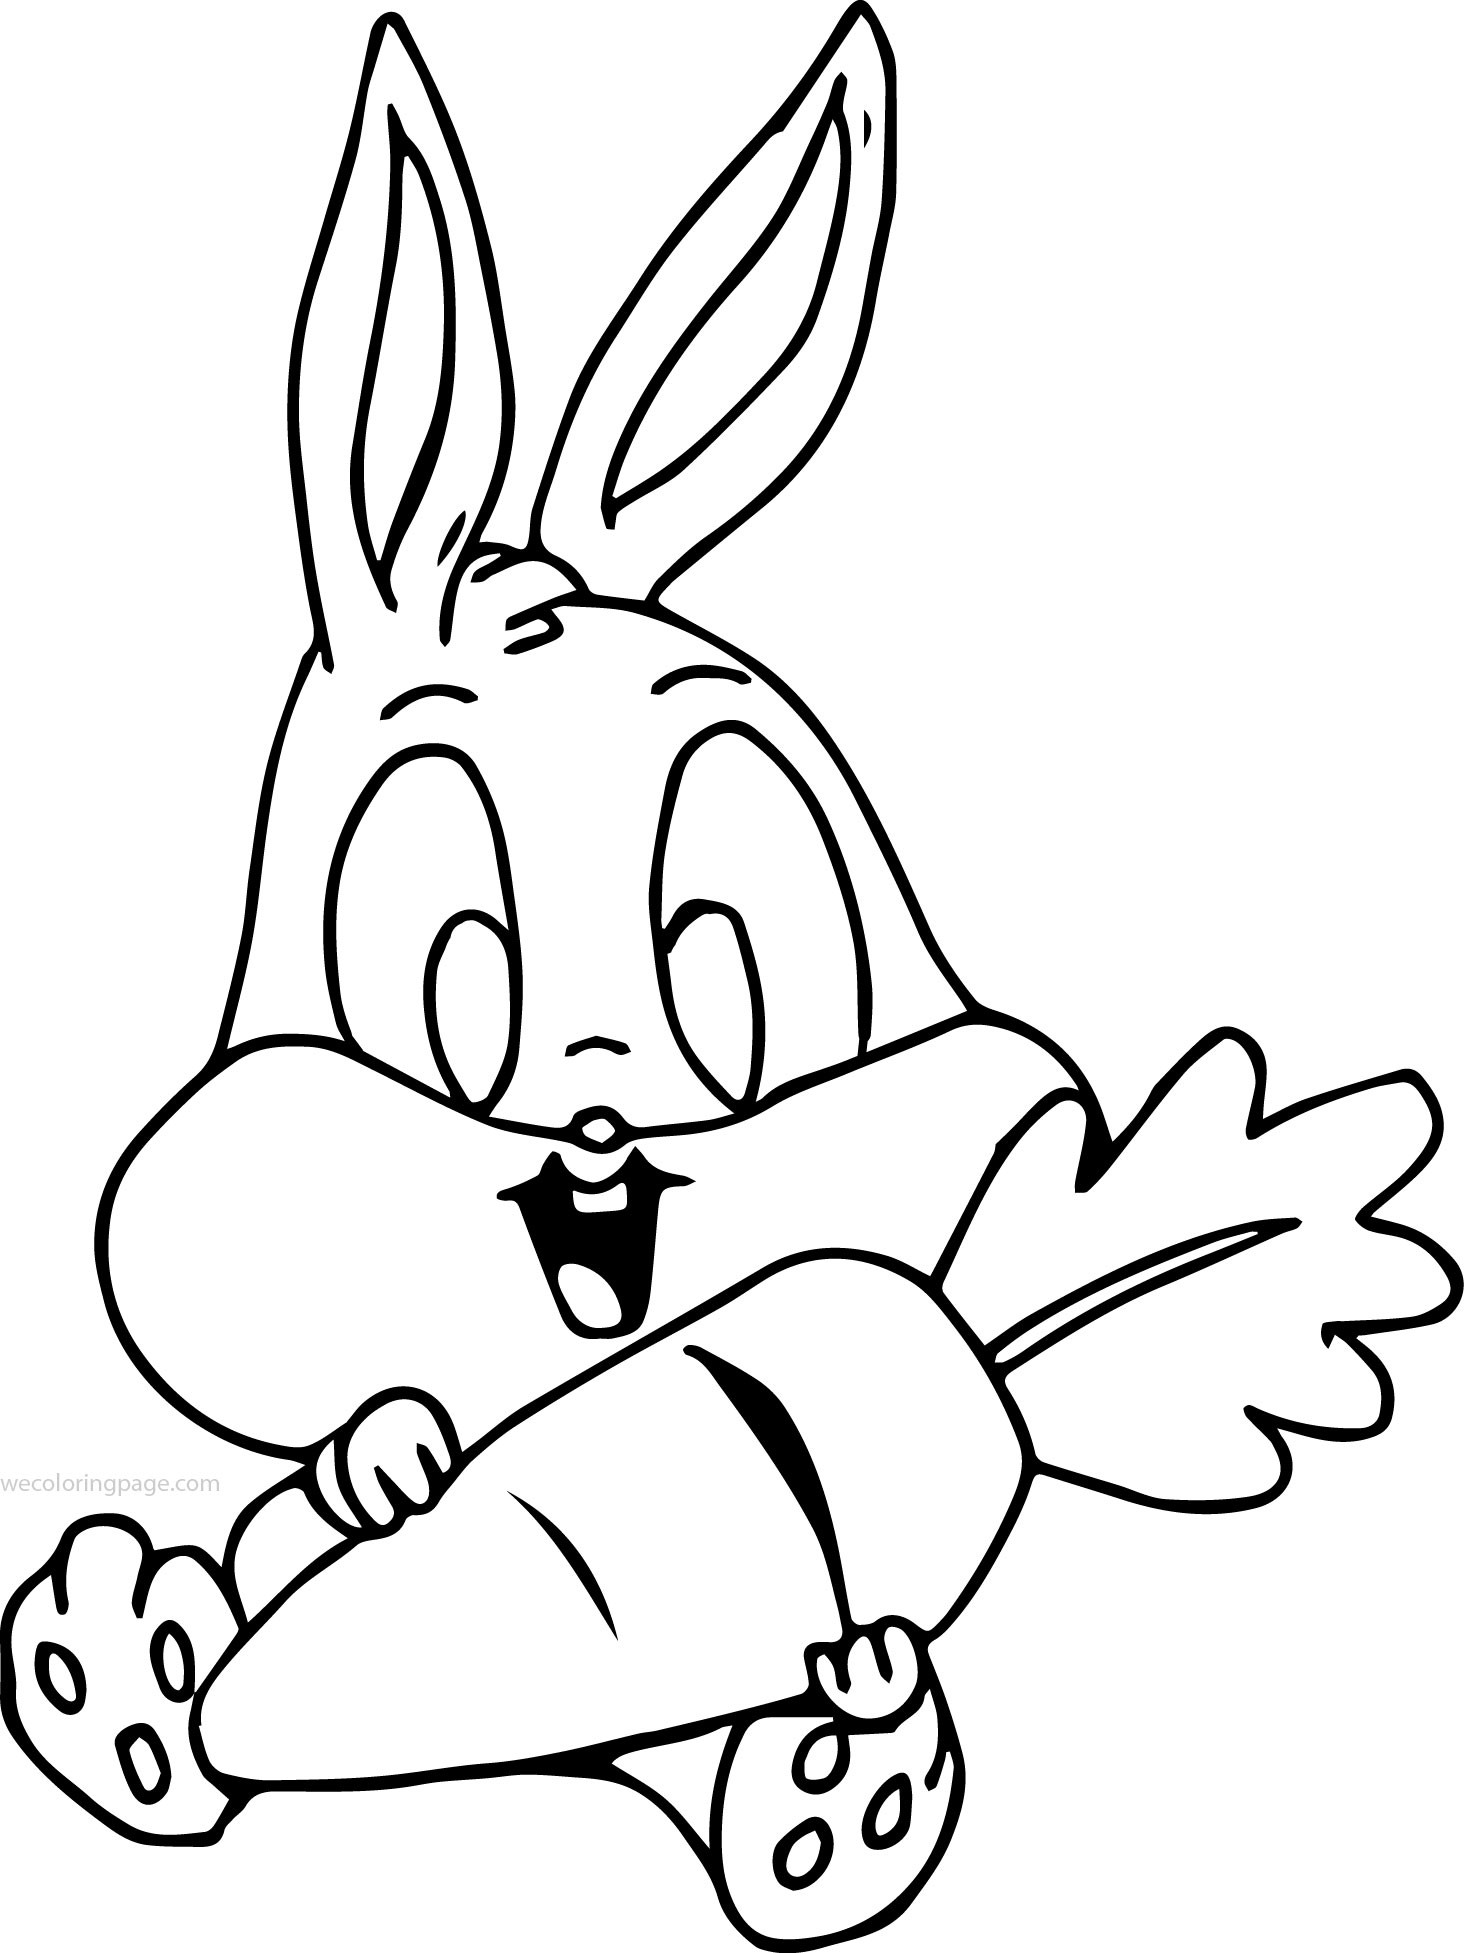 Coloring Pages Of Baby Bunnies
 Baby Bugs Bunny Holding Carrot Coloring Page